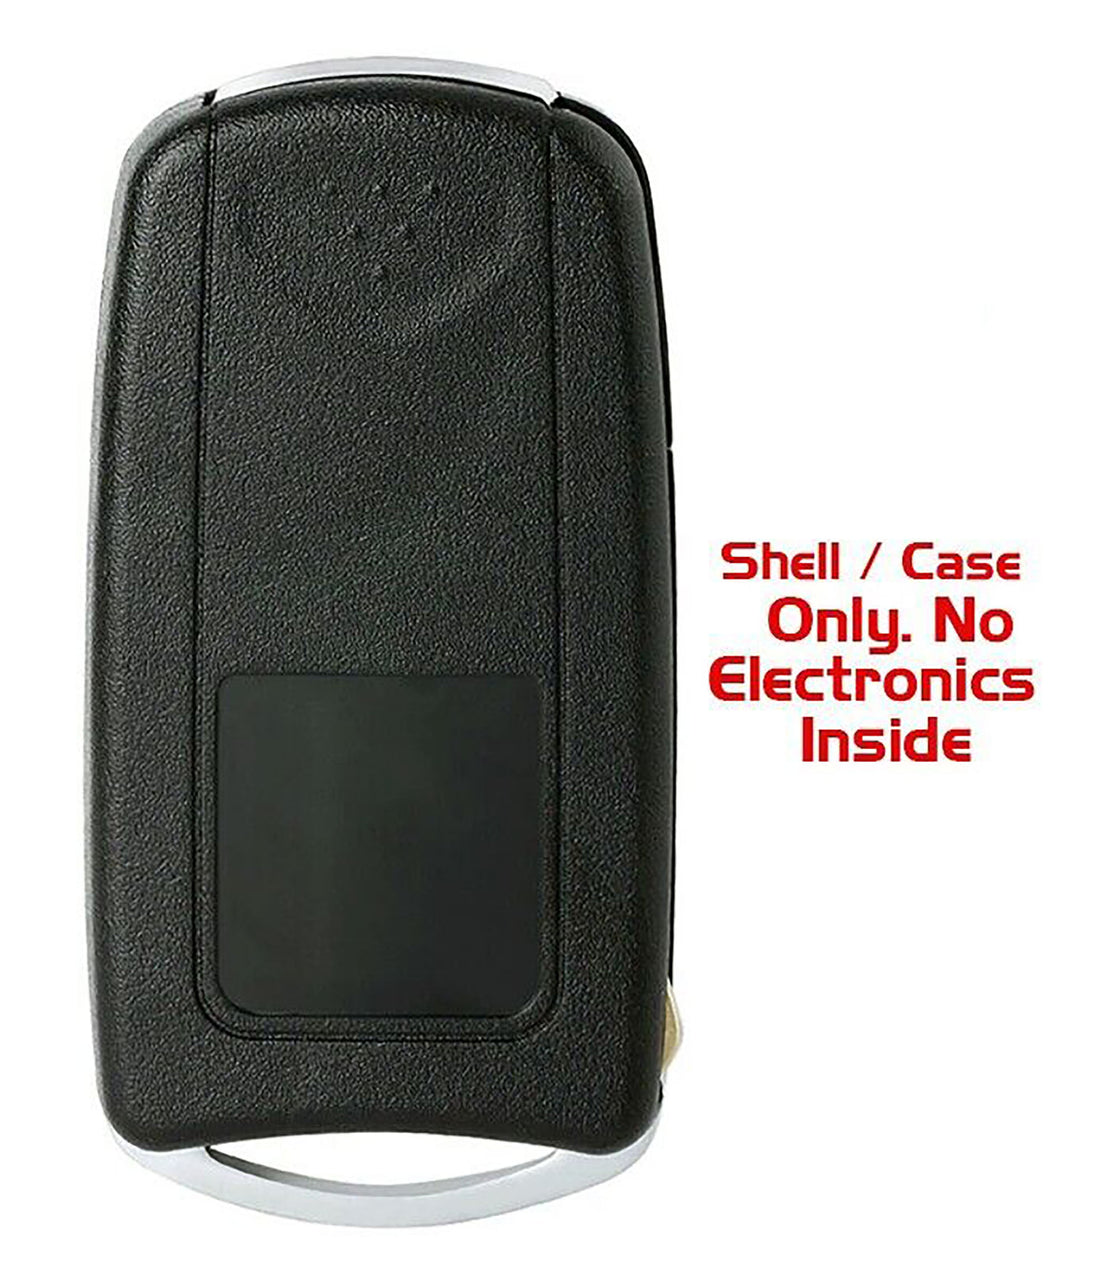 1x New Replacement Key Fob Remote SHELL / CASE Compatible with & Fit For Acura Vehicles - MPN N5F0602A1A-08 (NO electronics or Chip inside)